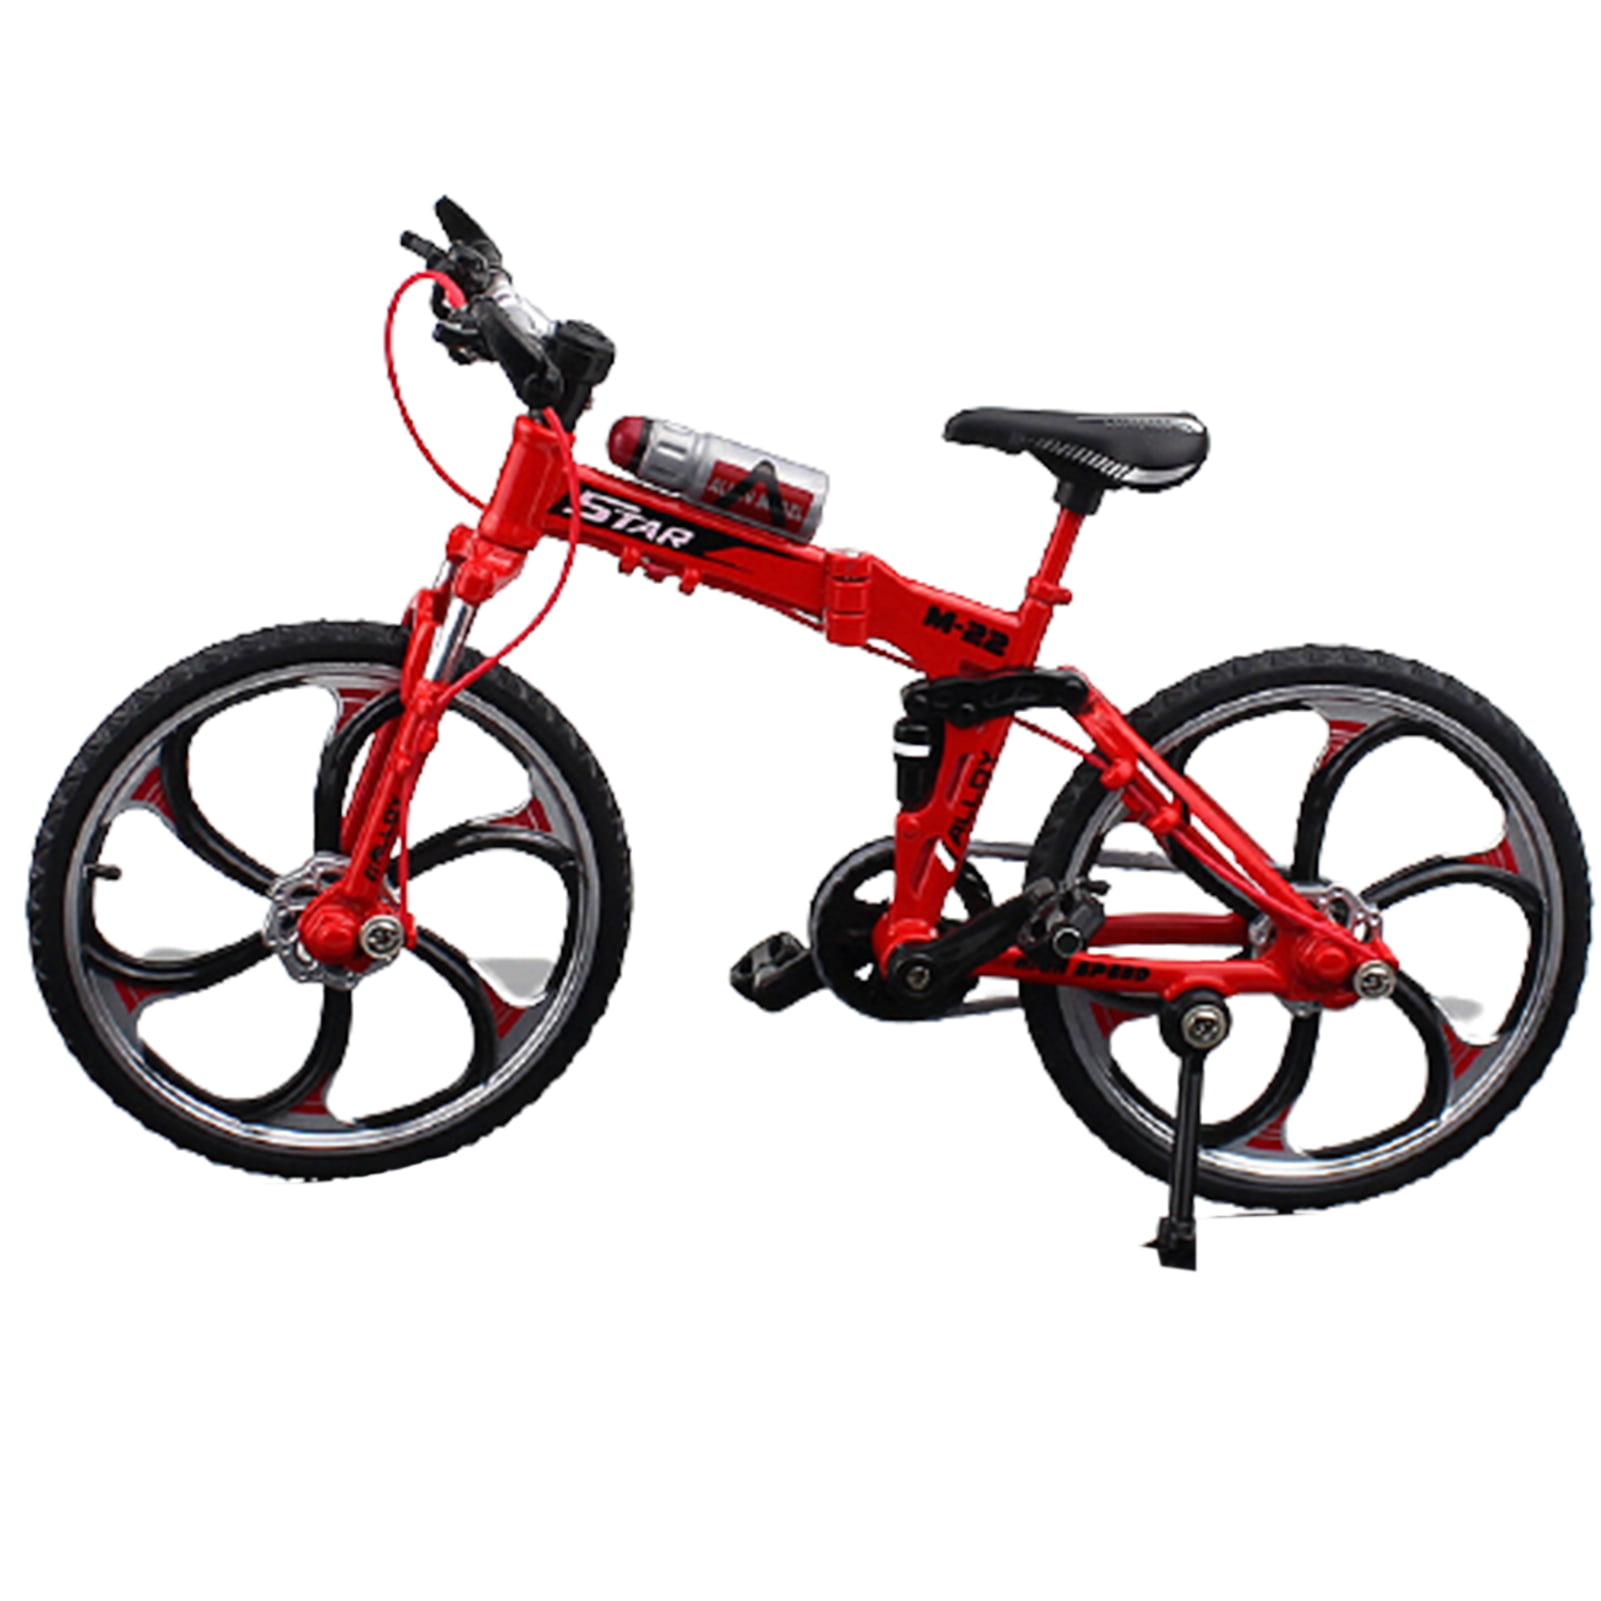 1:10 Simulation Mini Racing Bike Model Toy for Kids Collectibles Red White A 